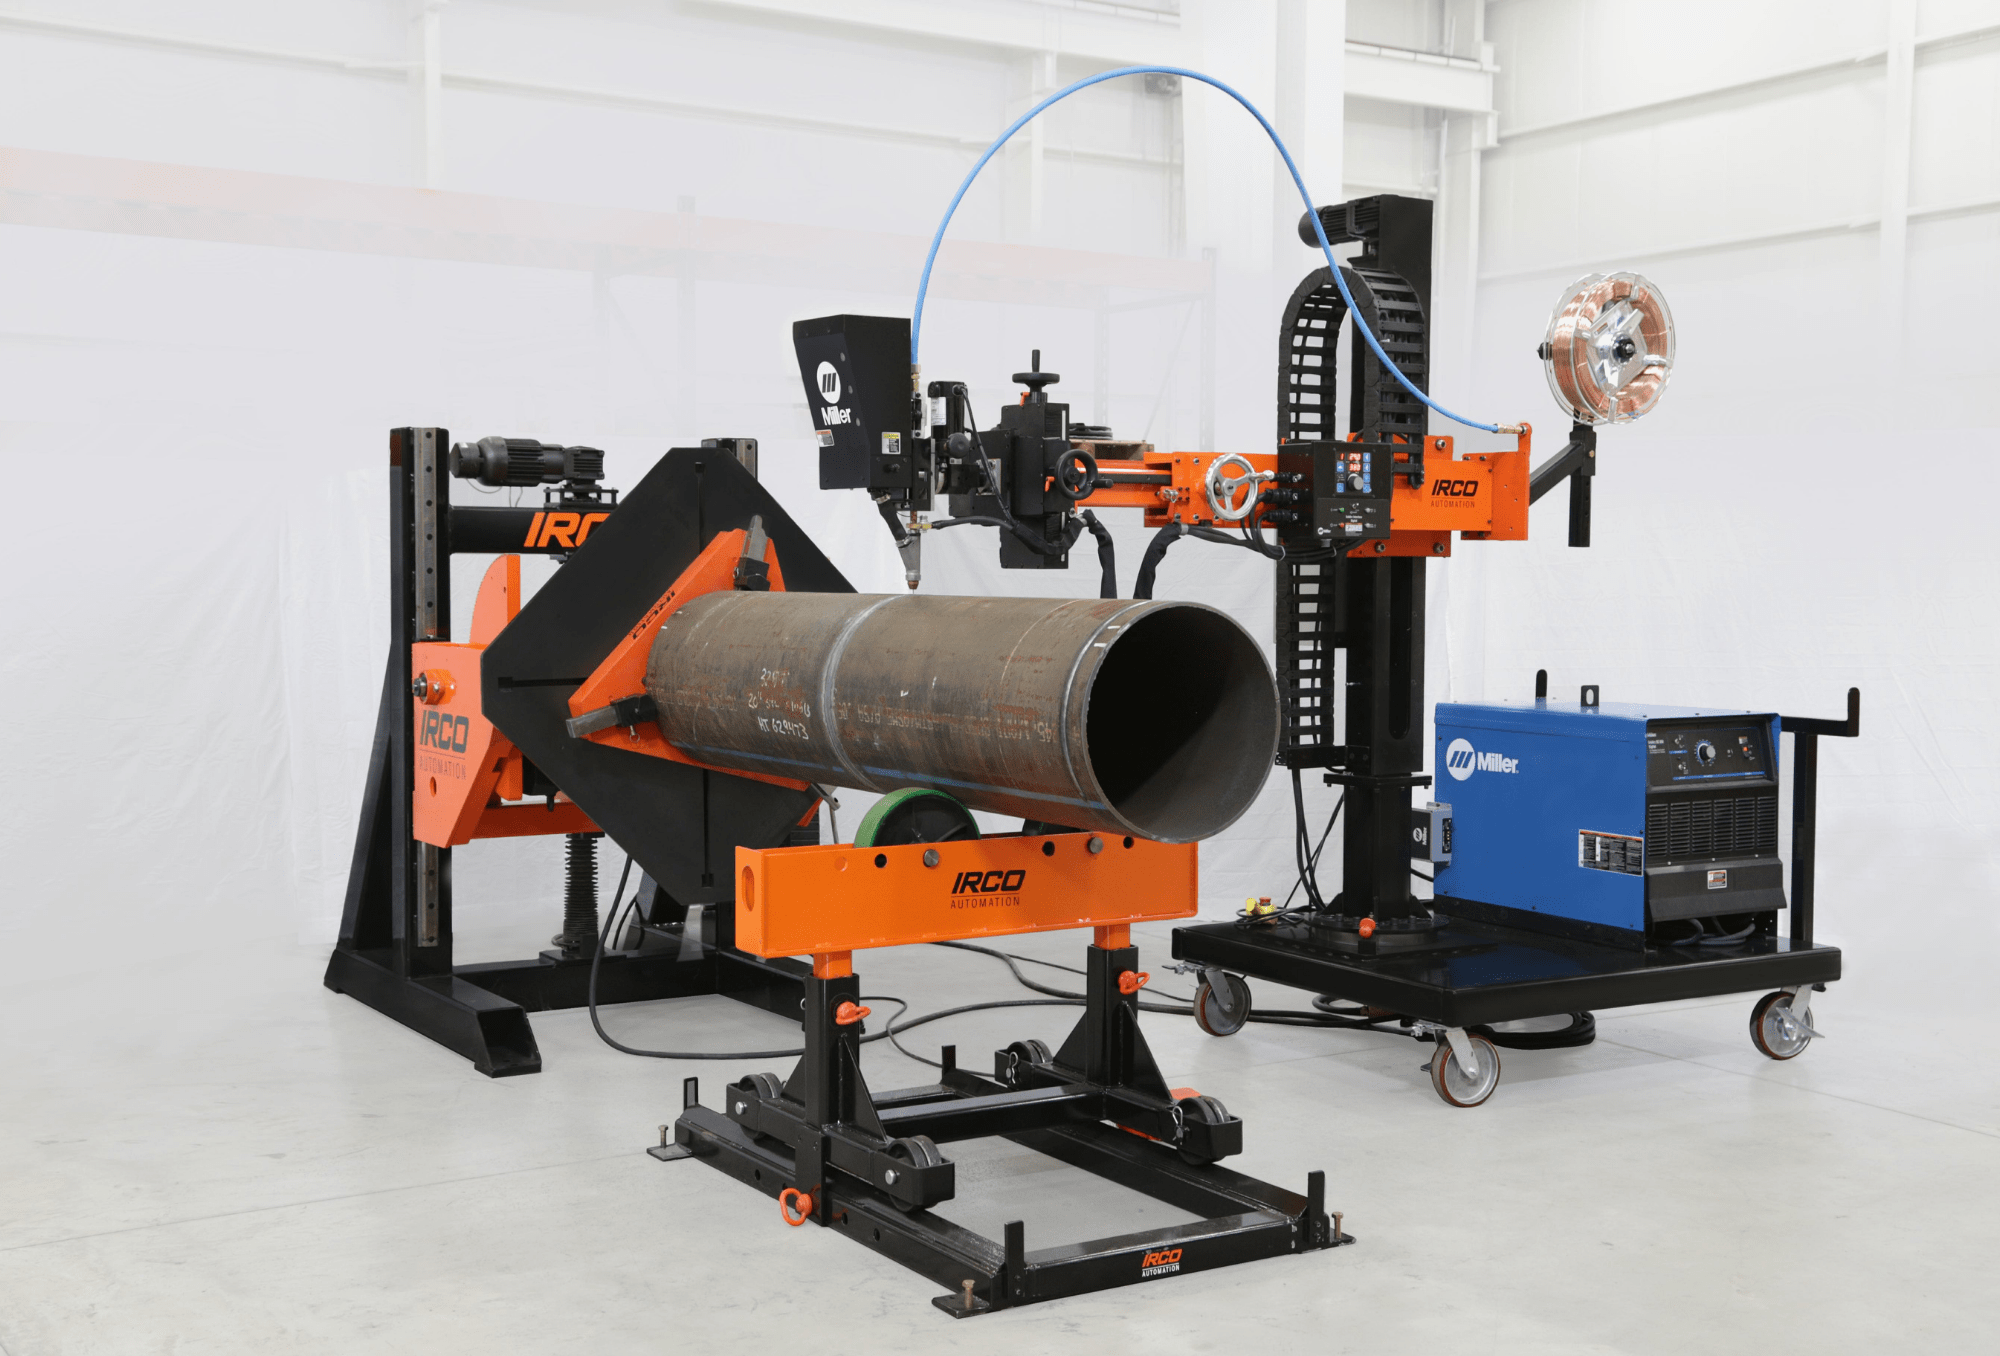 Portable welding System